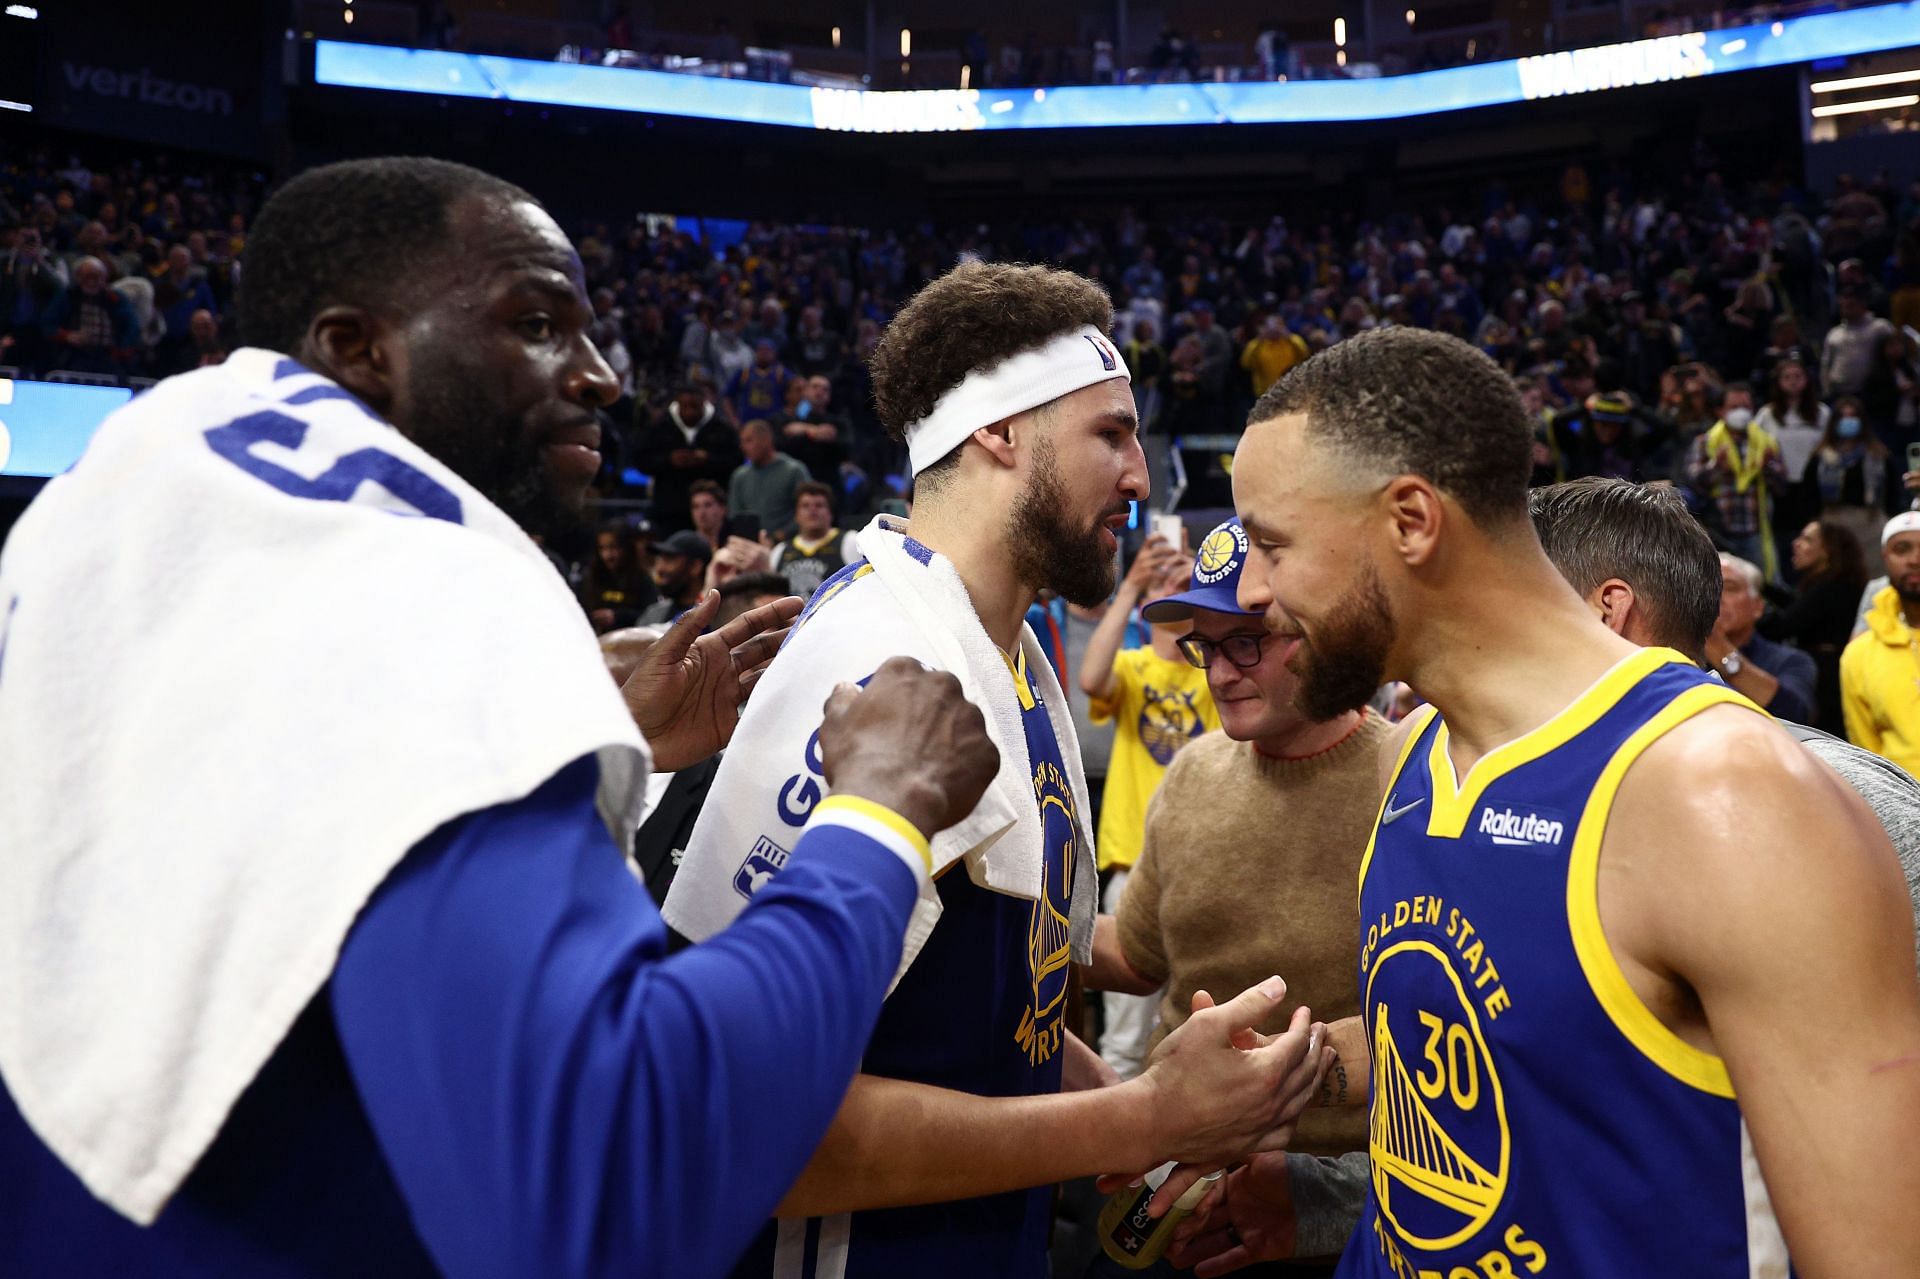 Steph Curry, Klay Thompson and Draymond Green celebrate the win